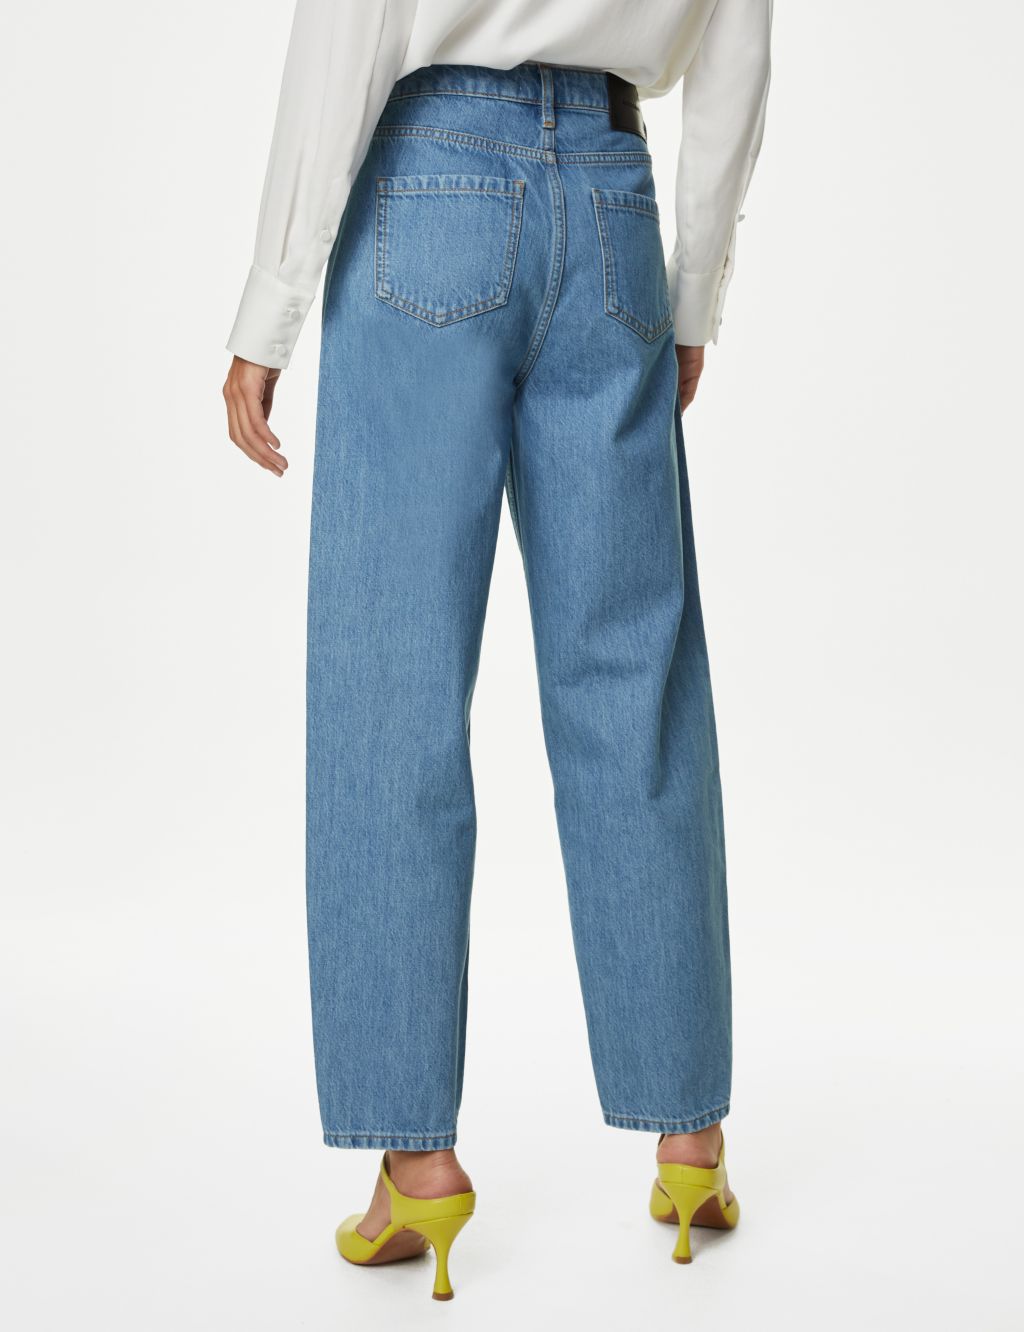 Relaxed High Waisted Straight Leg Jeans image 4